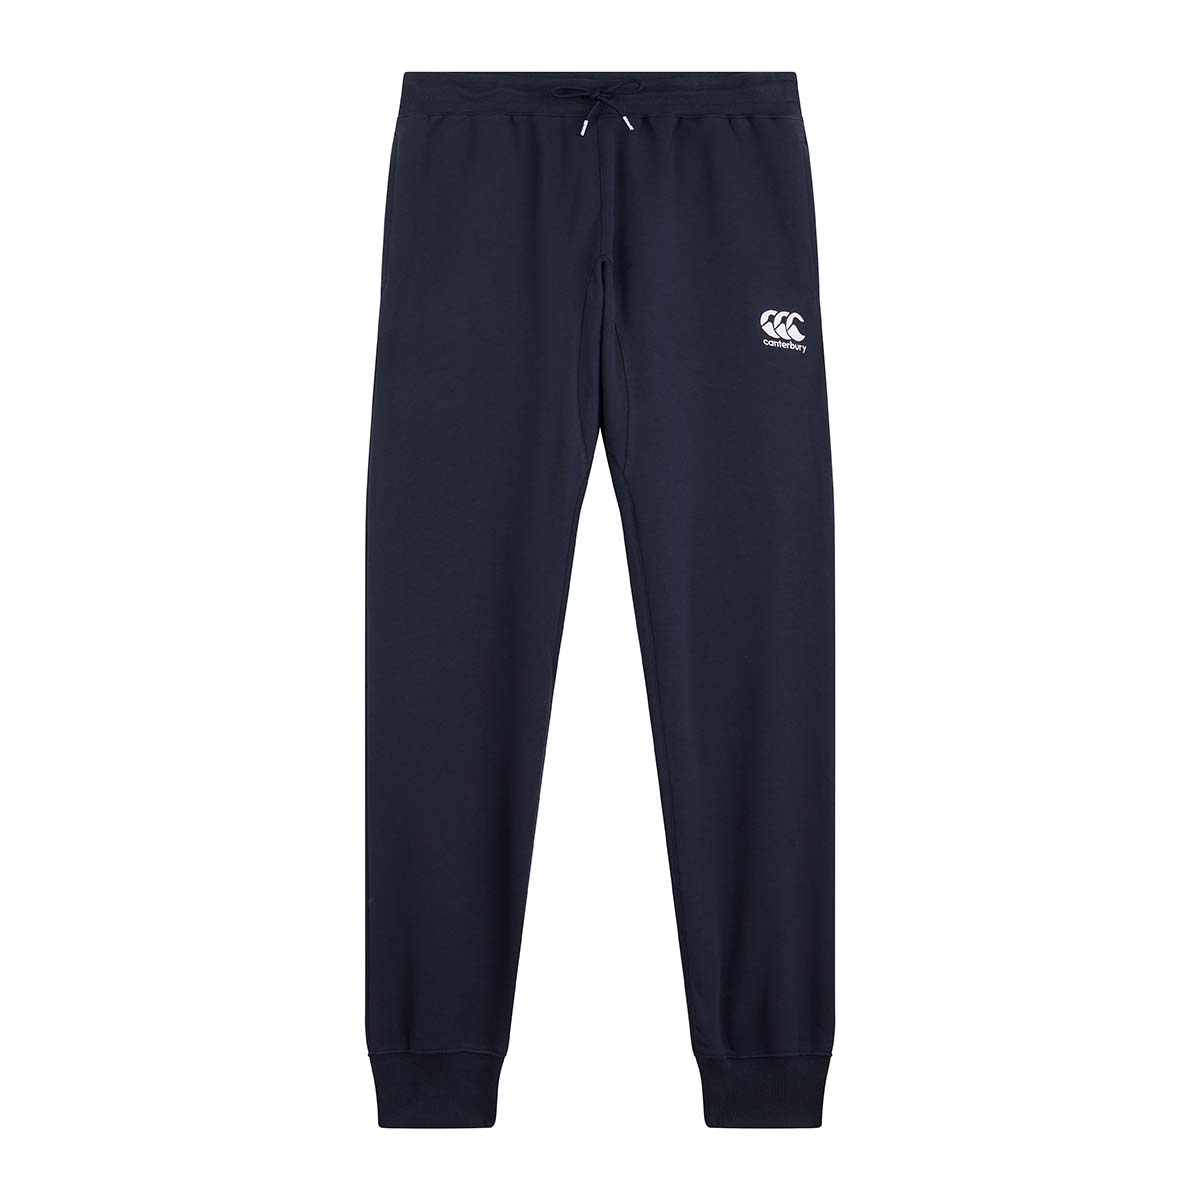 Mens Navy Canterbury Cuffed Sweat Pants | rugbystore